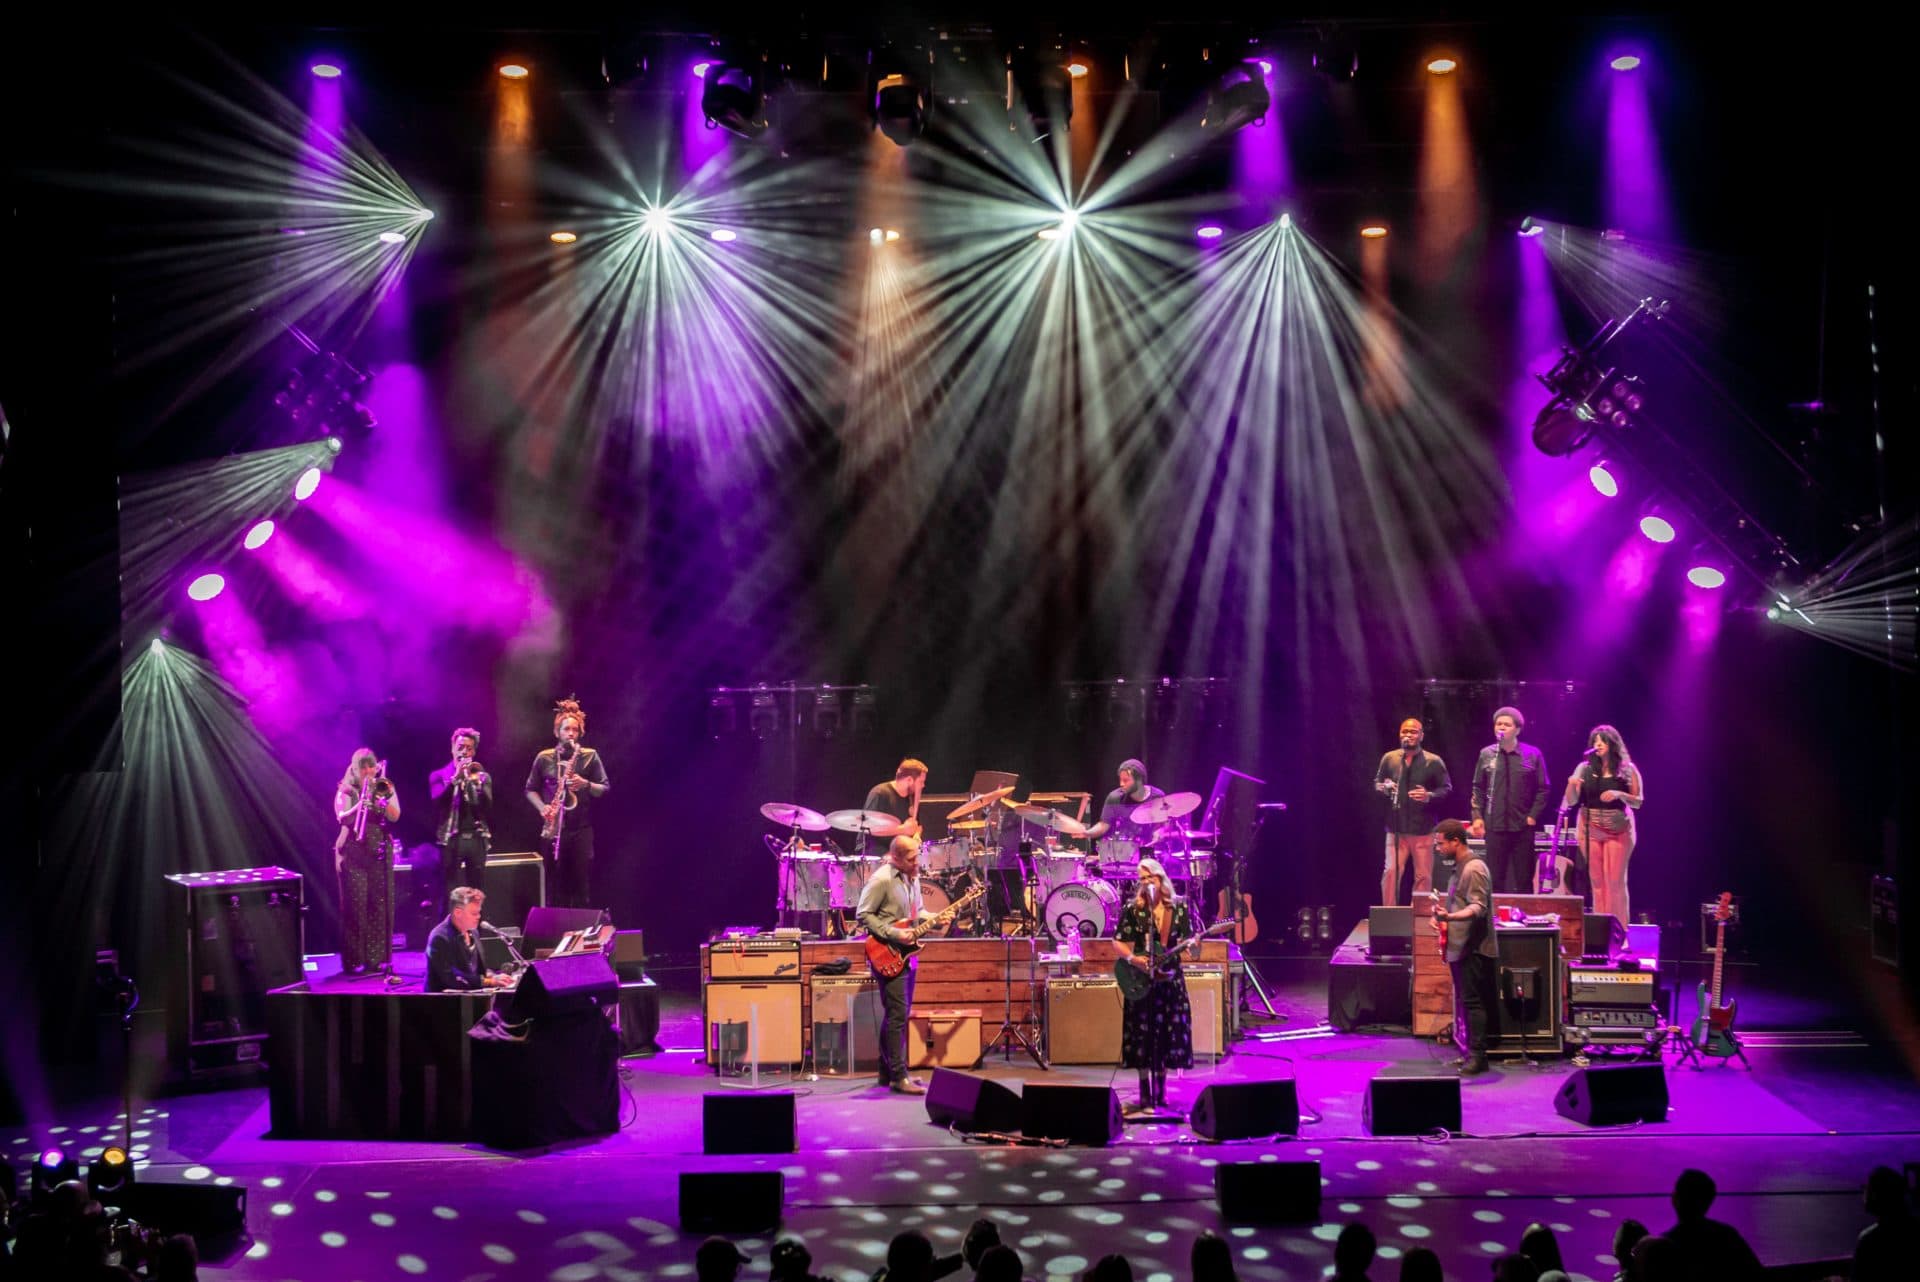 Tedeschi Trucks Band at the Beacon Theatre in NYC on Oct. 5, 2021. (Courtesy Stuart Levine)